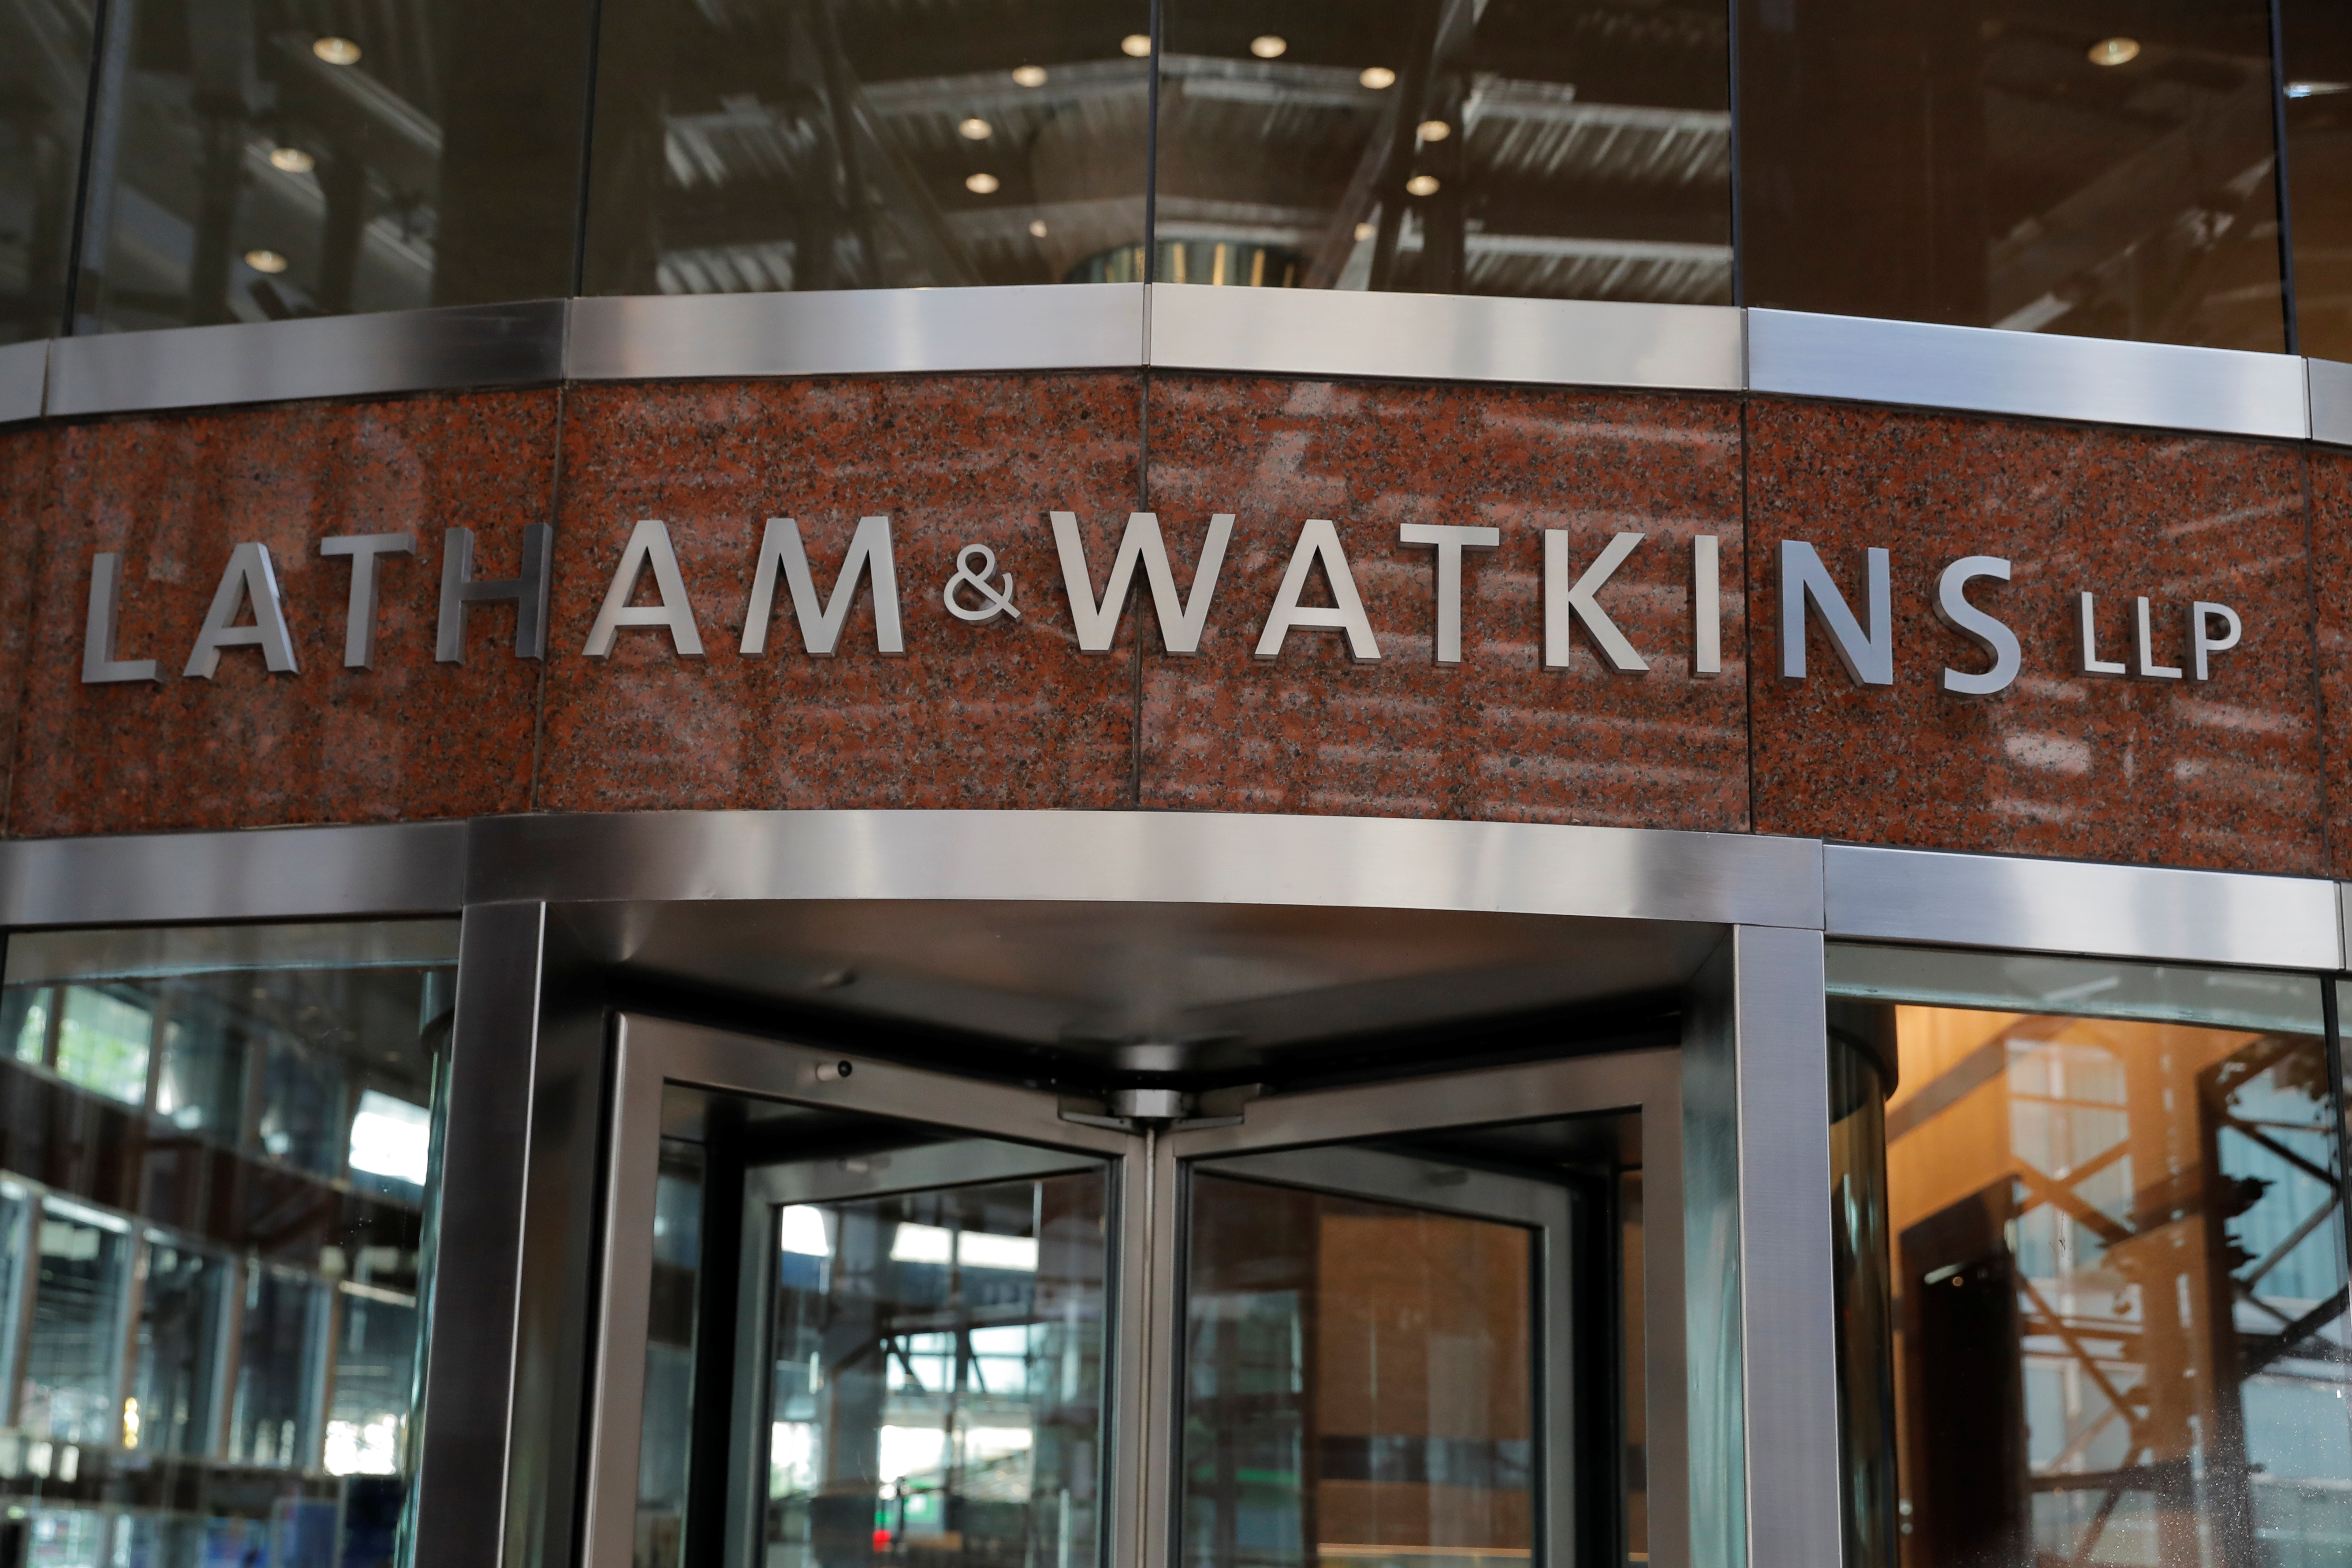 Signage is seen on the exterior of the building where law firm Latham & Watkins LLP are located in Manhattan, New York City